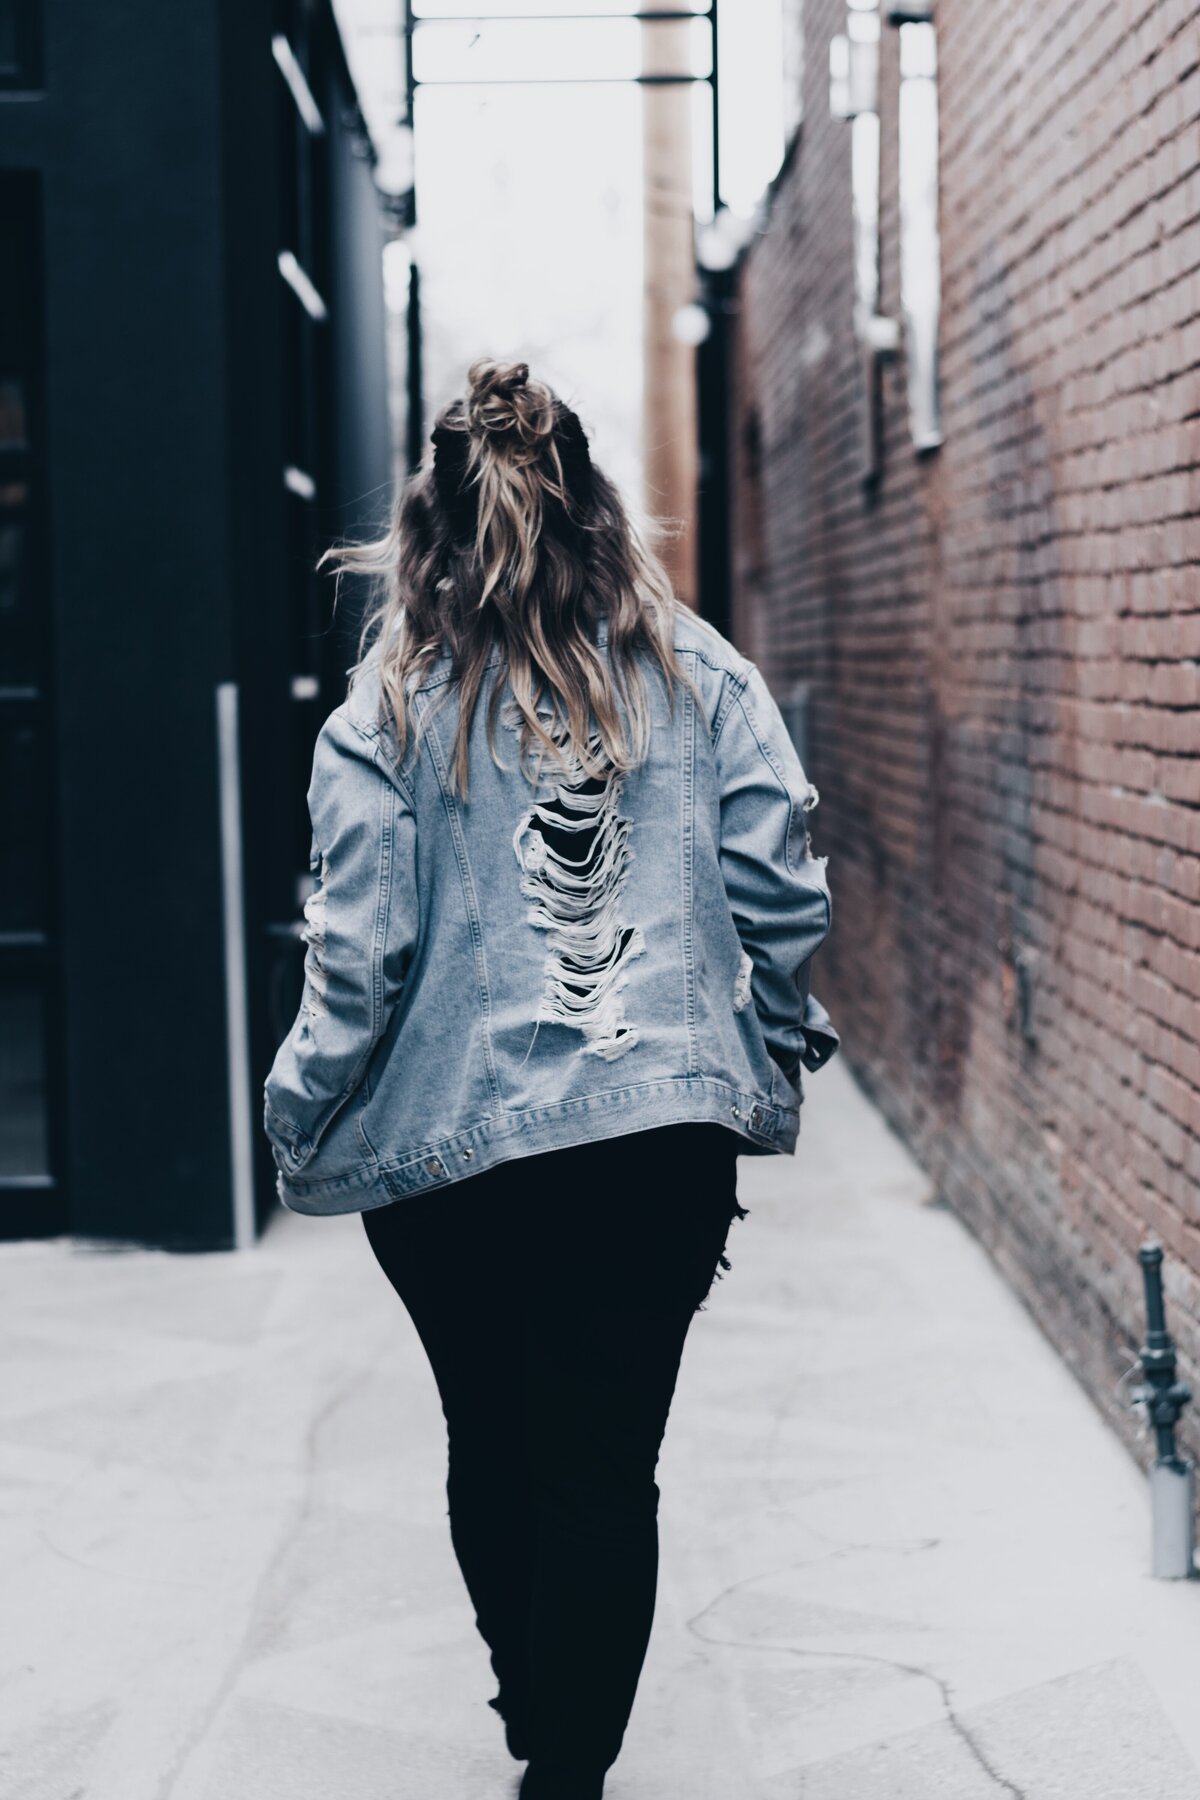 Photo of a  woman in distressed jean jacket walking away  in back alley photo.